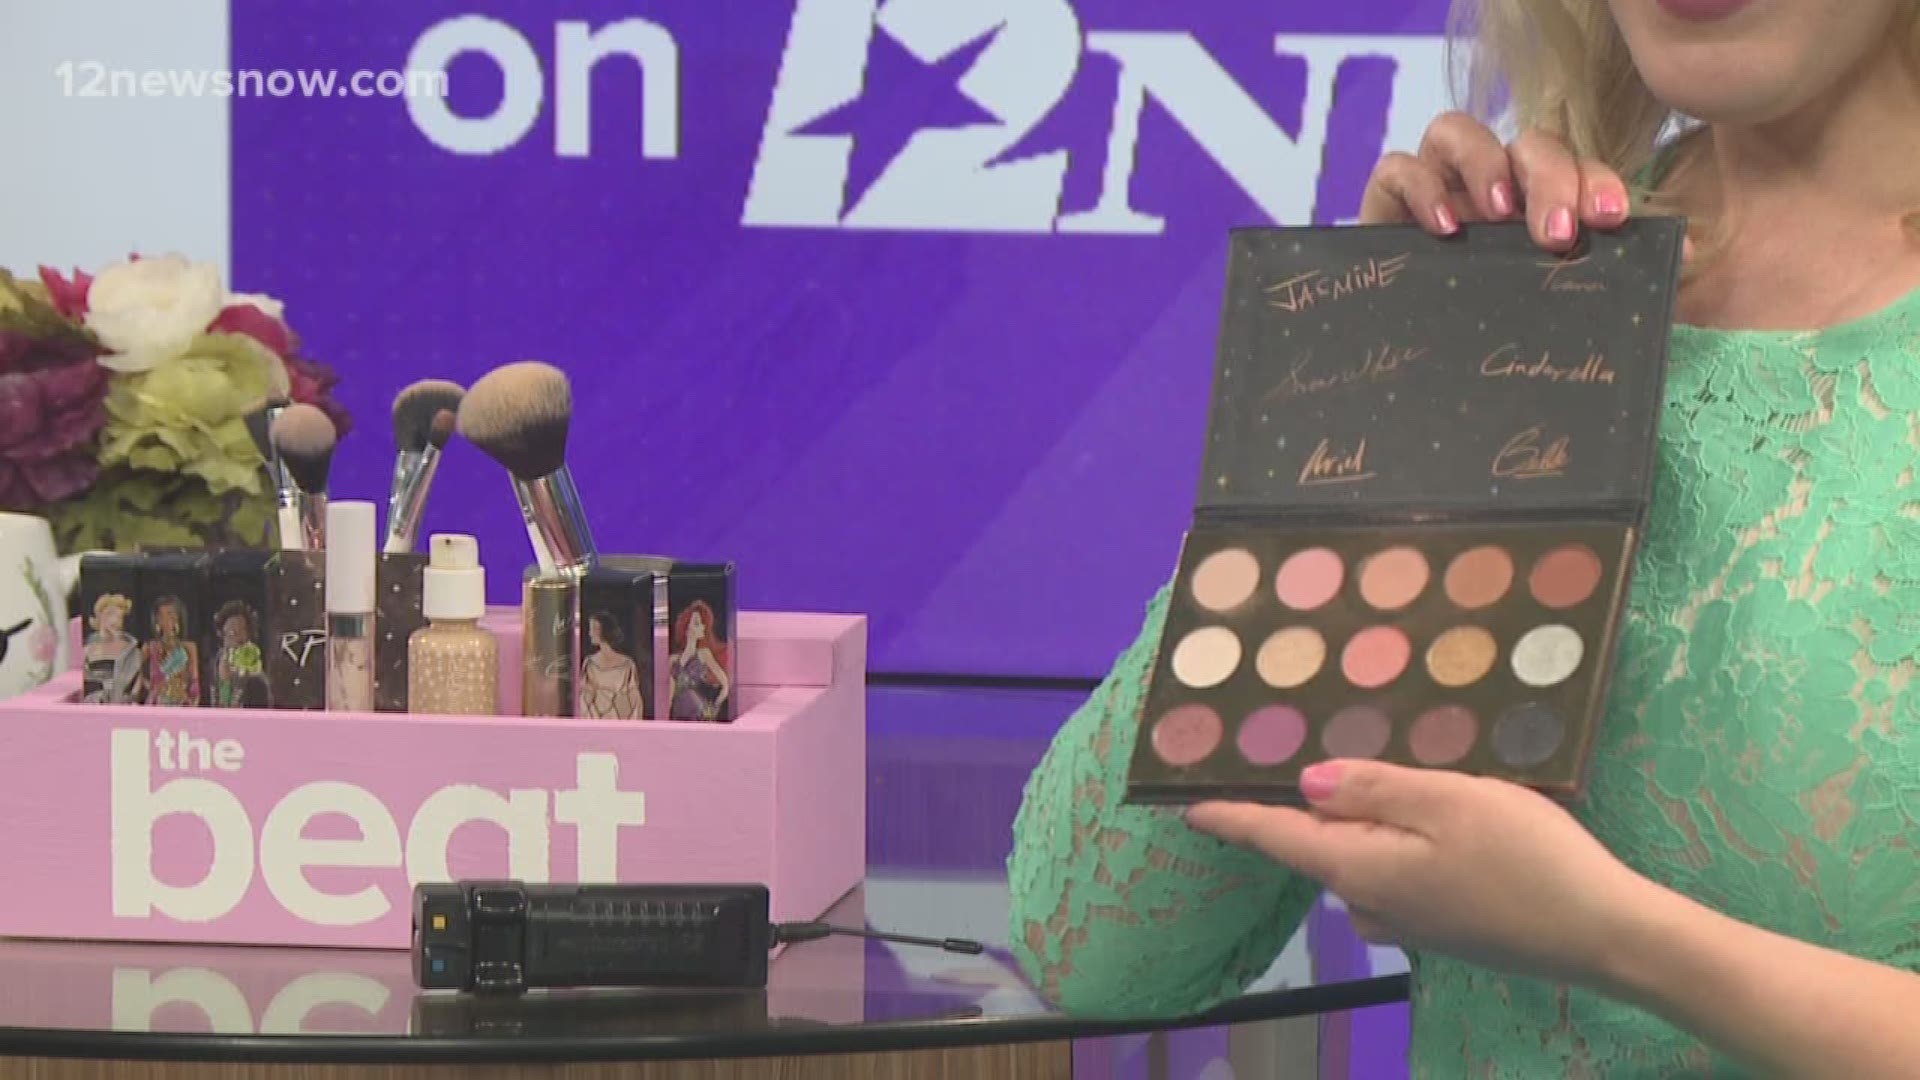 Celebrate Earth Day with some environmentally friendly beauty products! Share your eco-friendly products with us using #TheBeaton12.